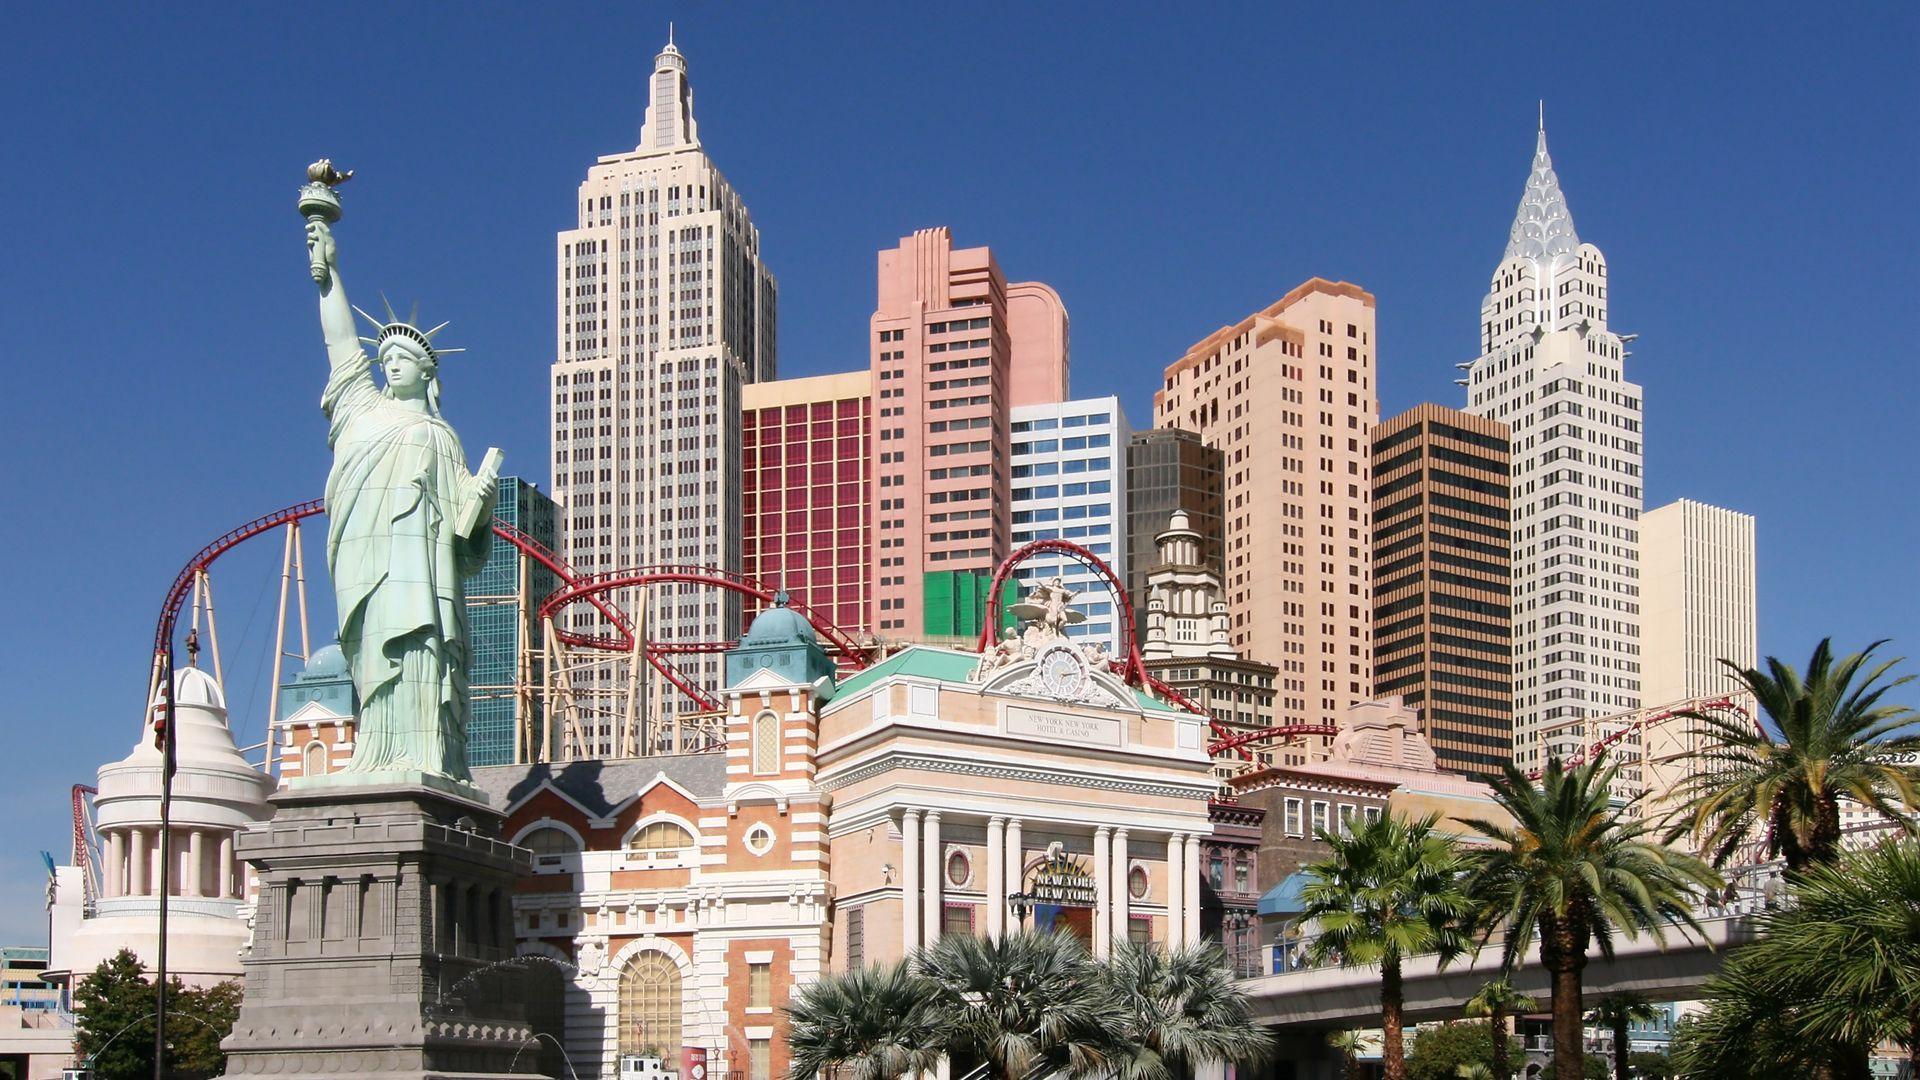 las vegas wallpapers – 1920×1080 High Definition Wallpapers